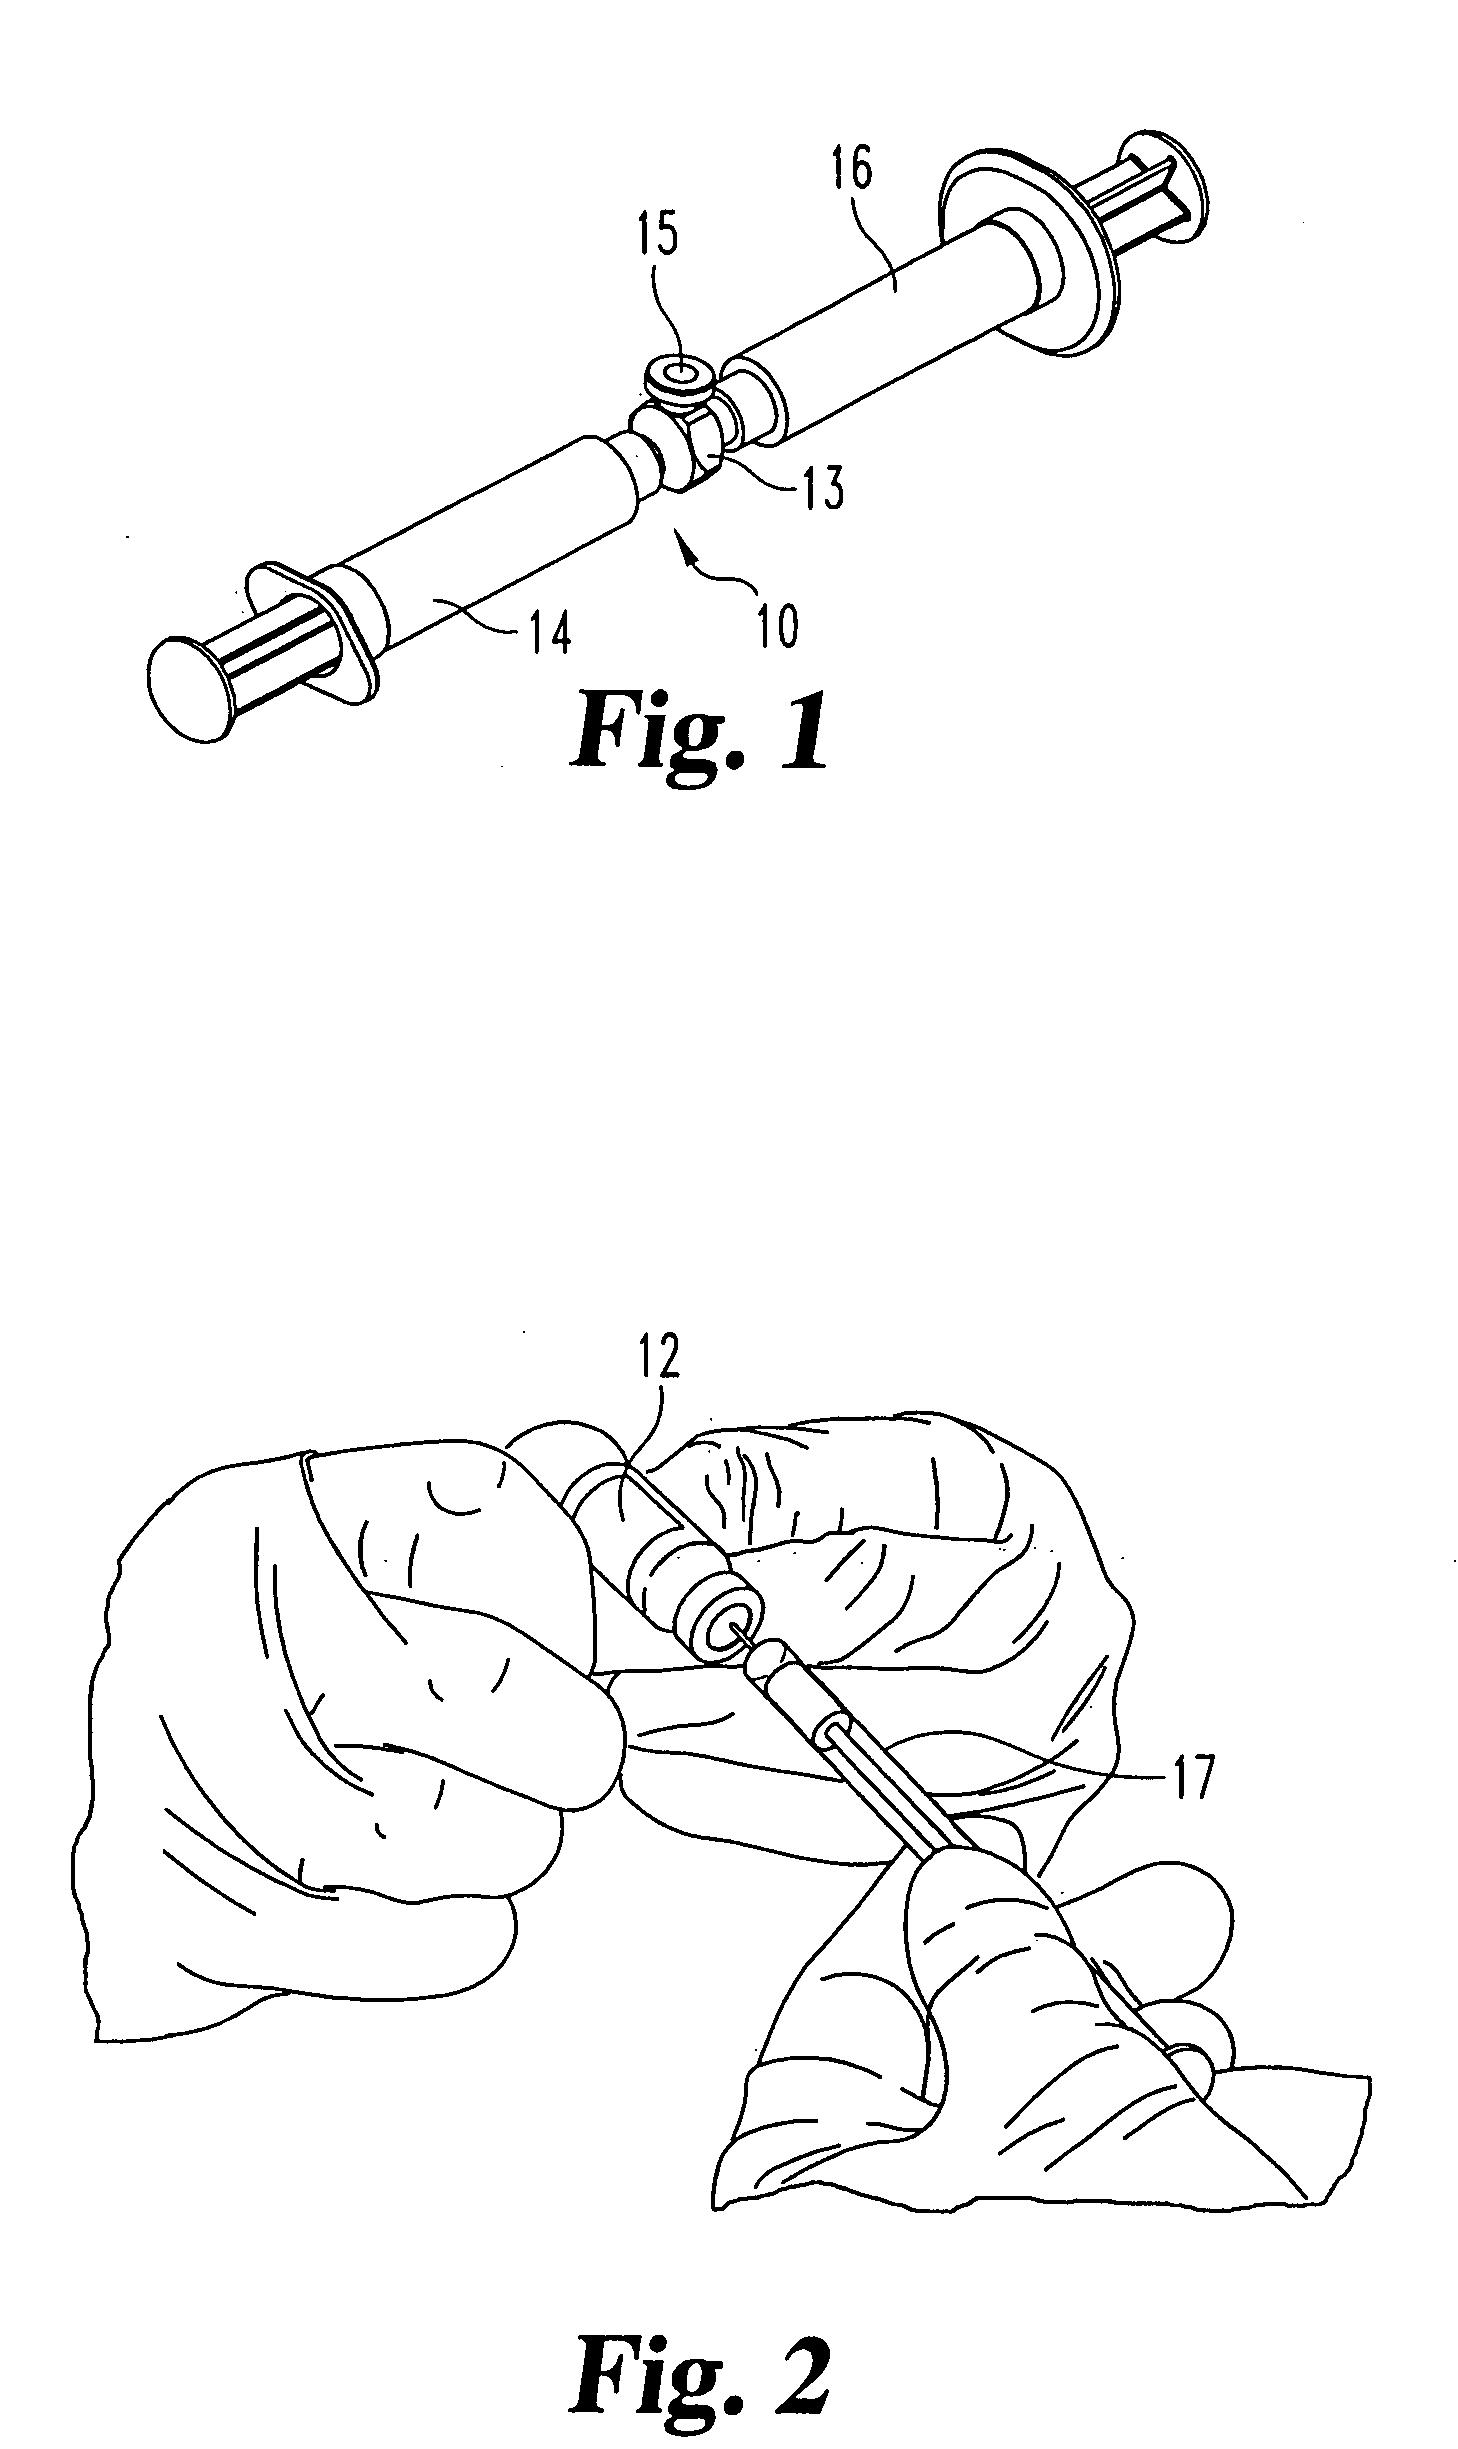 Apparatus and kit for injecting a curable biomaterial into into an intervertebral space